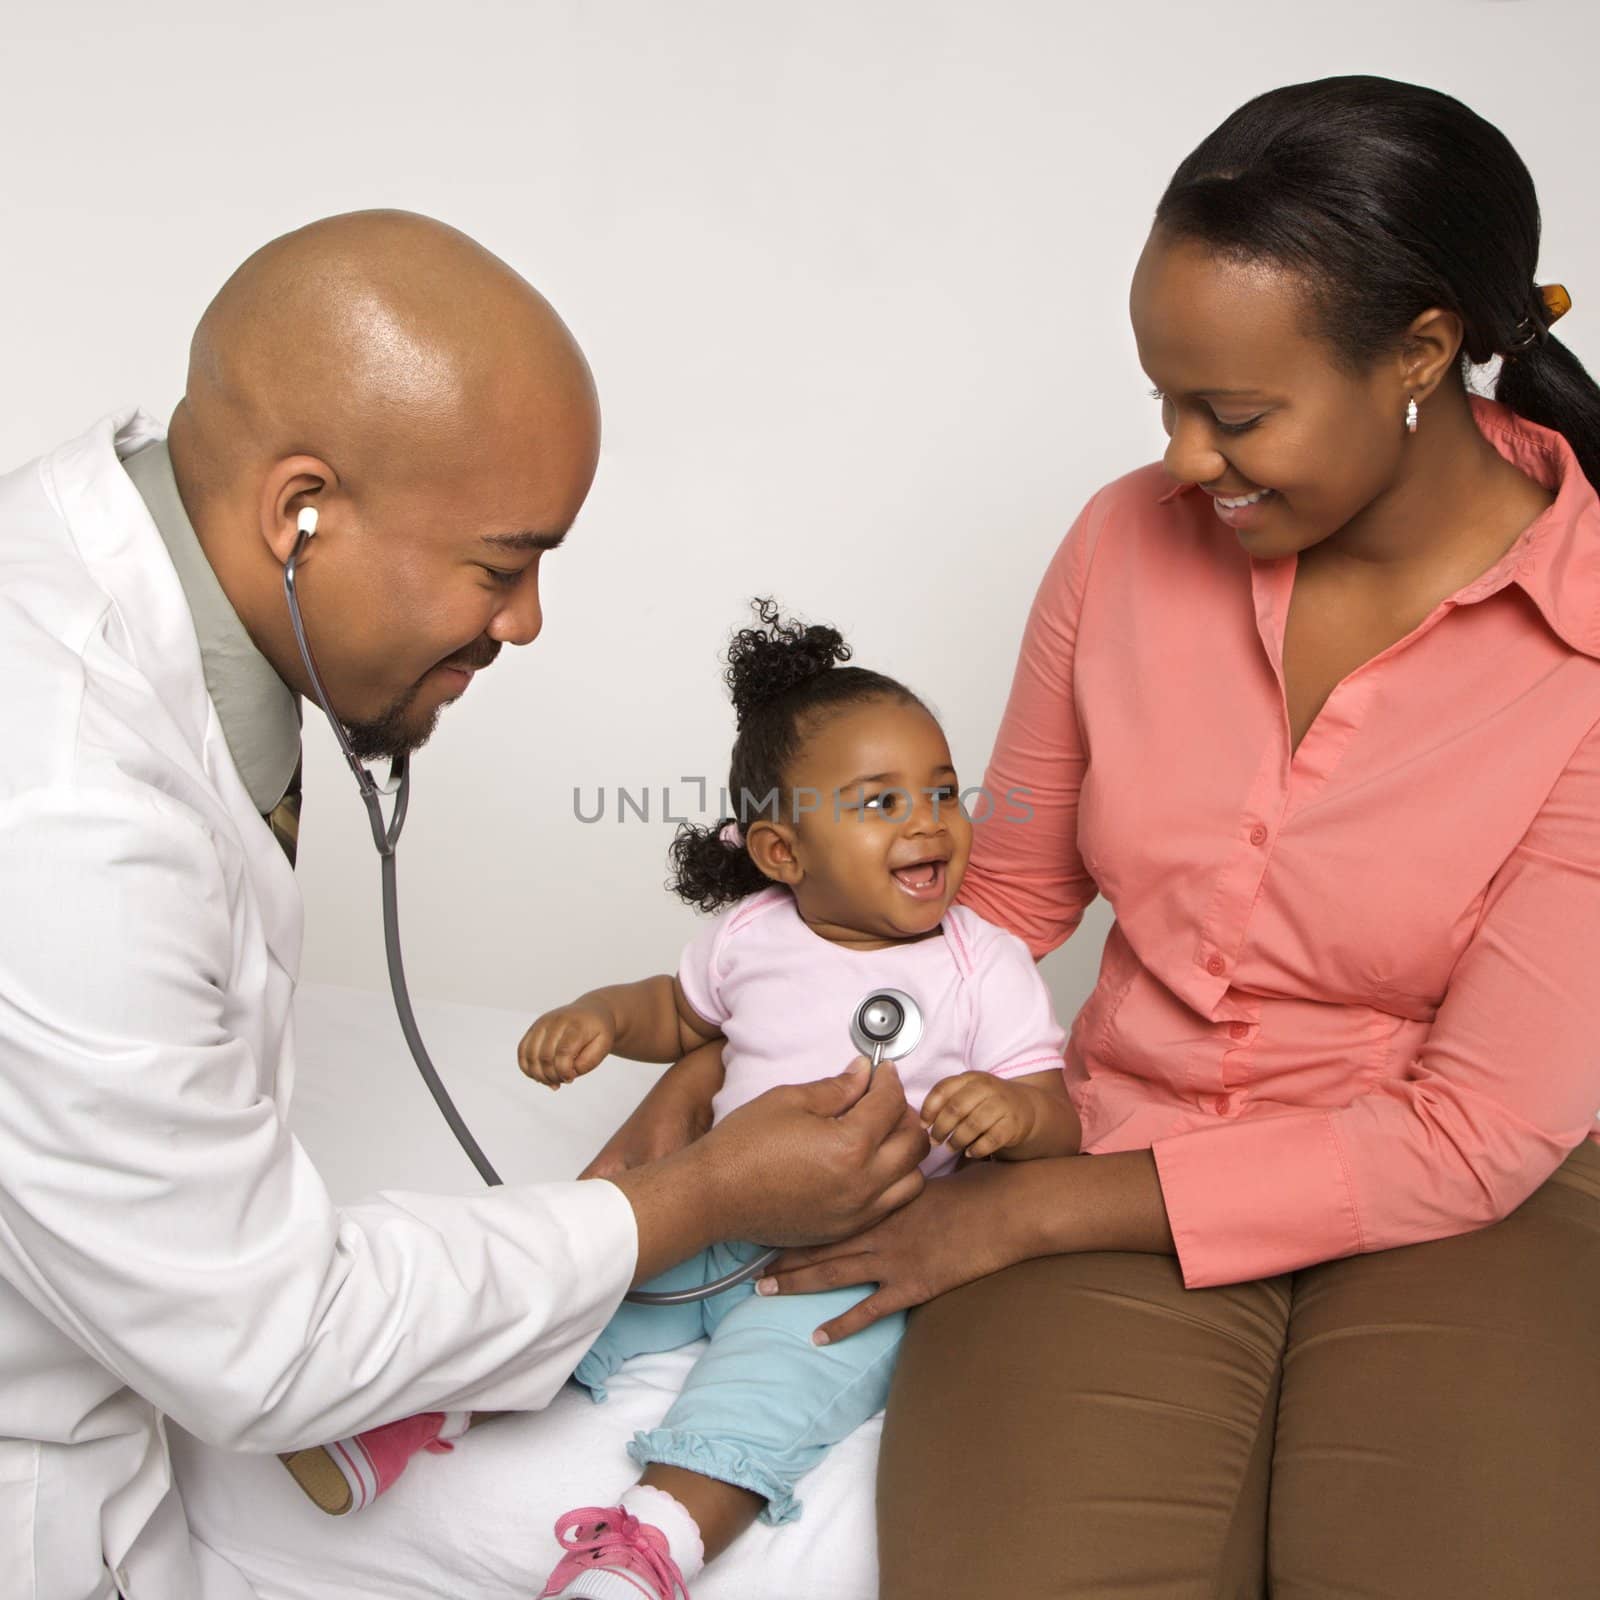 African-American male doctor examining baby girl with mother watching.